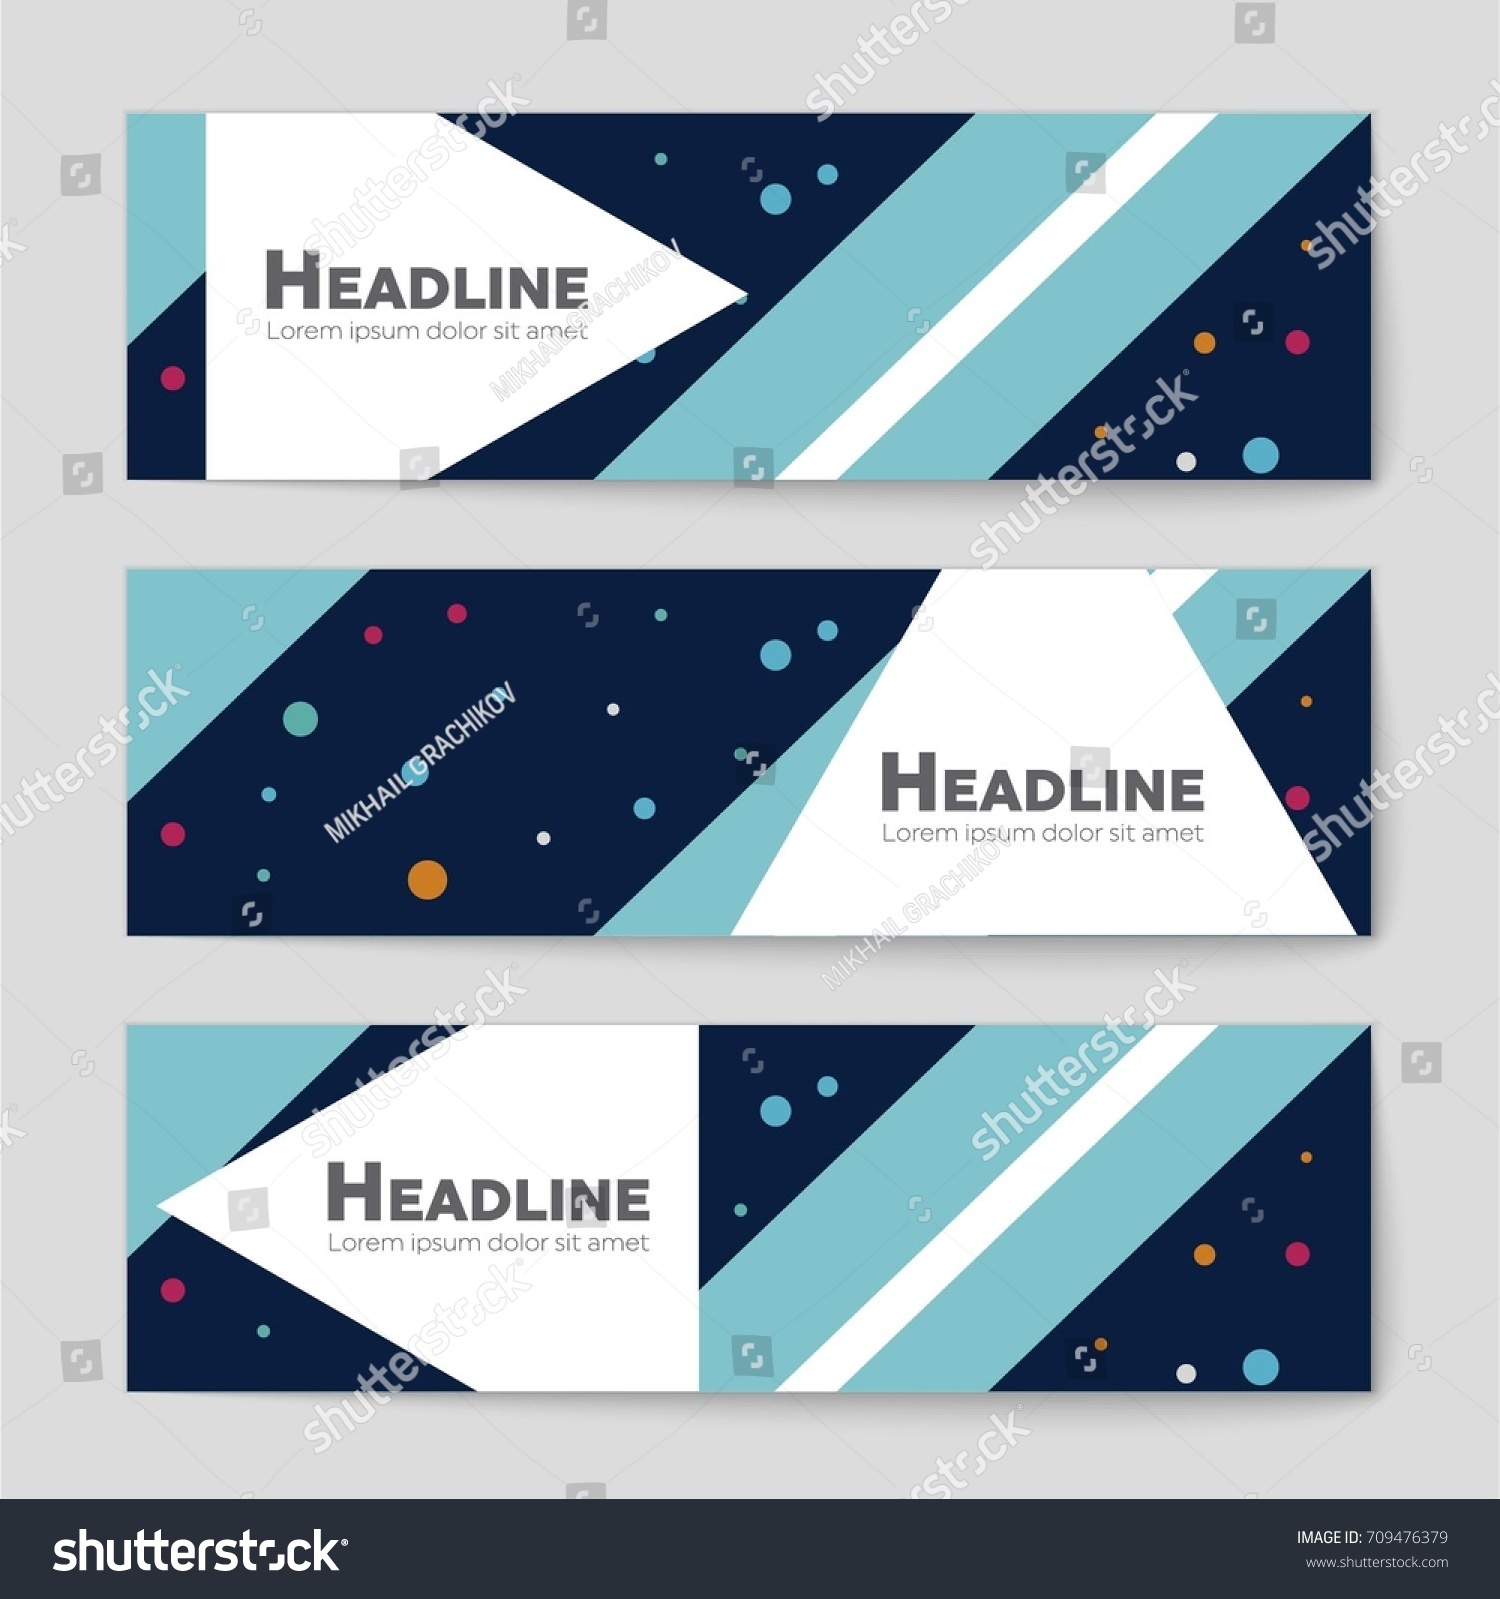 Abstract vector layout background set. For art template design, list, front page, mockup brochure theme style, banner, idea, cover, booklet, print, flyer, book, blank, card, ad, sign, sheet, a4 #709476379